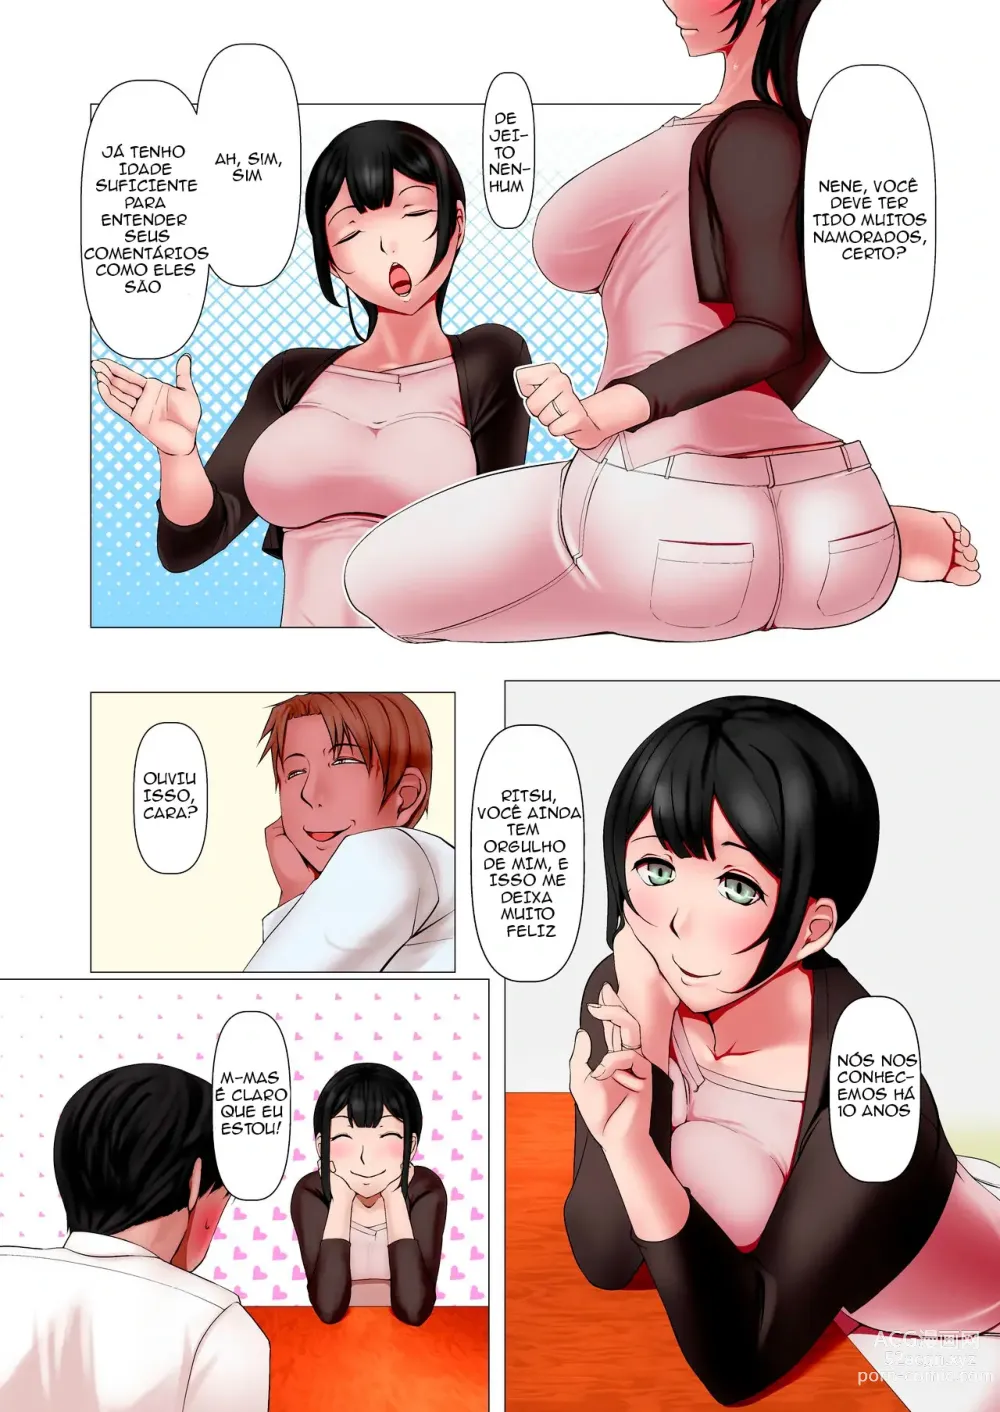 Page 4 of doujinshi This wife became that guy's meat onahole, too.